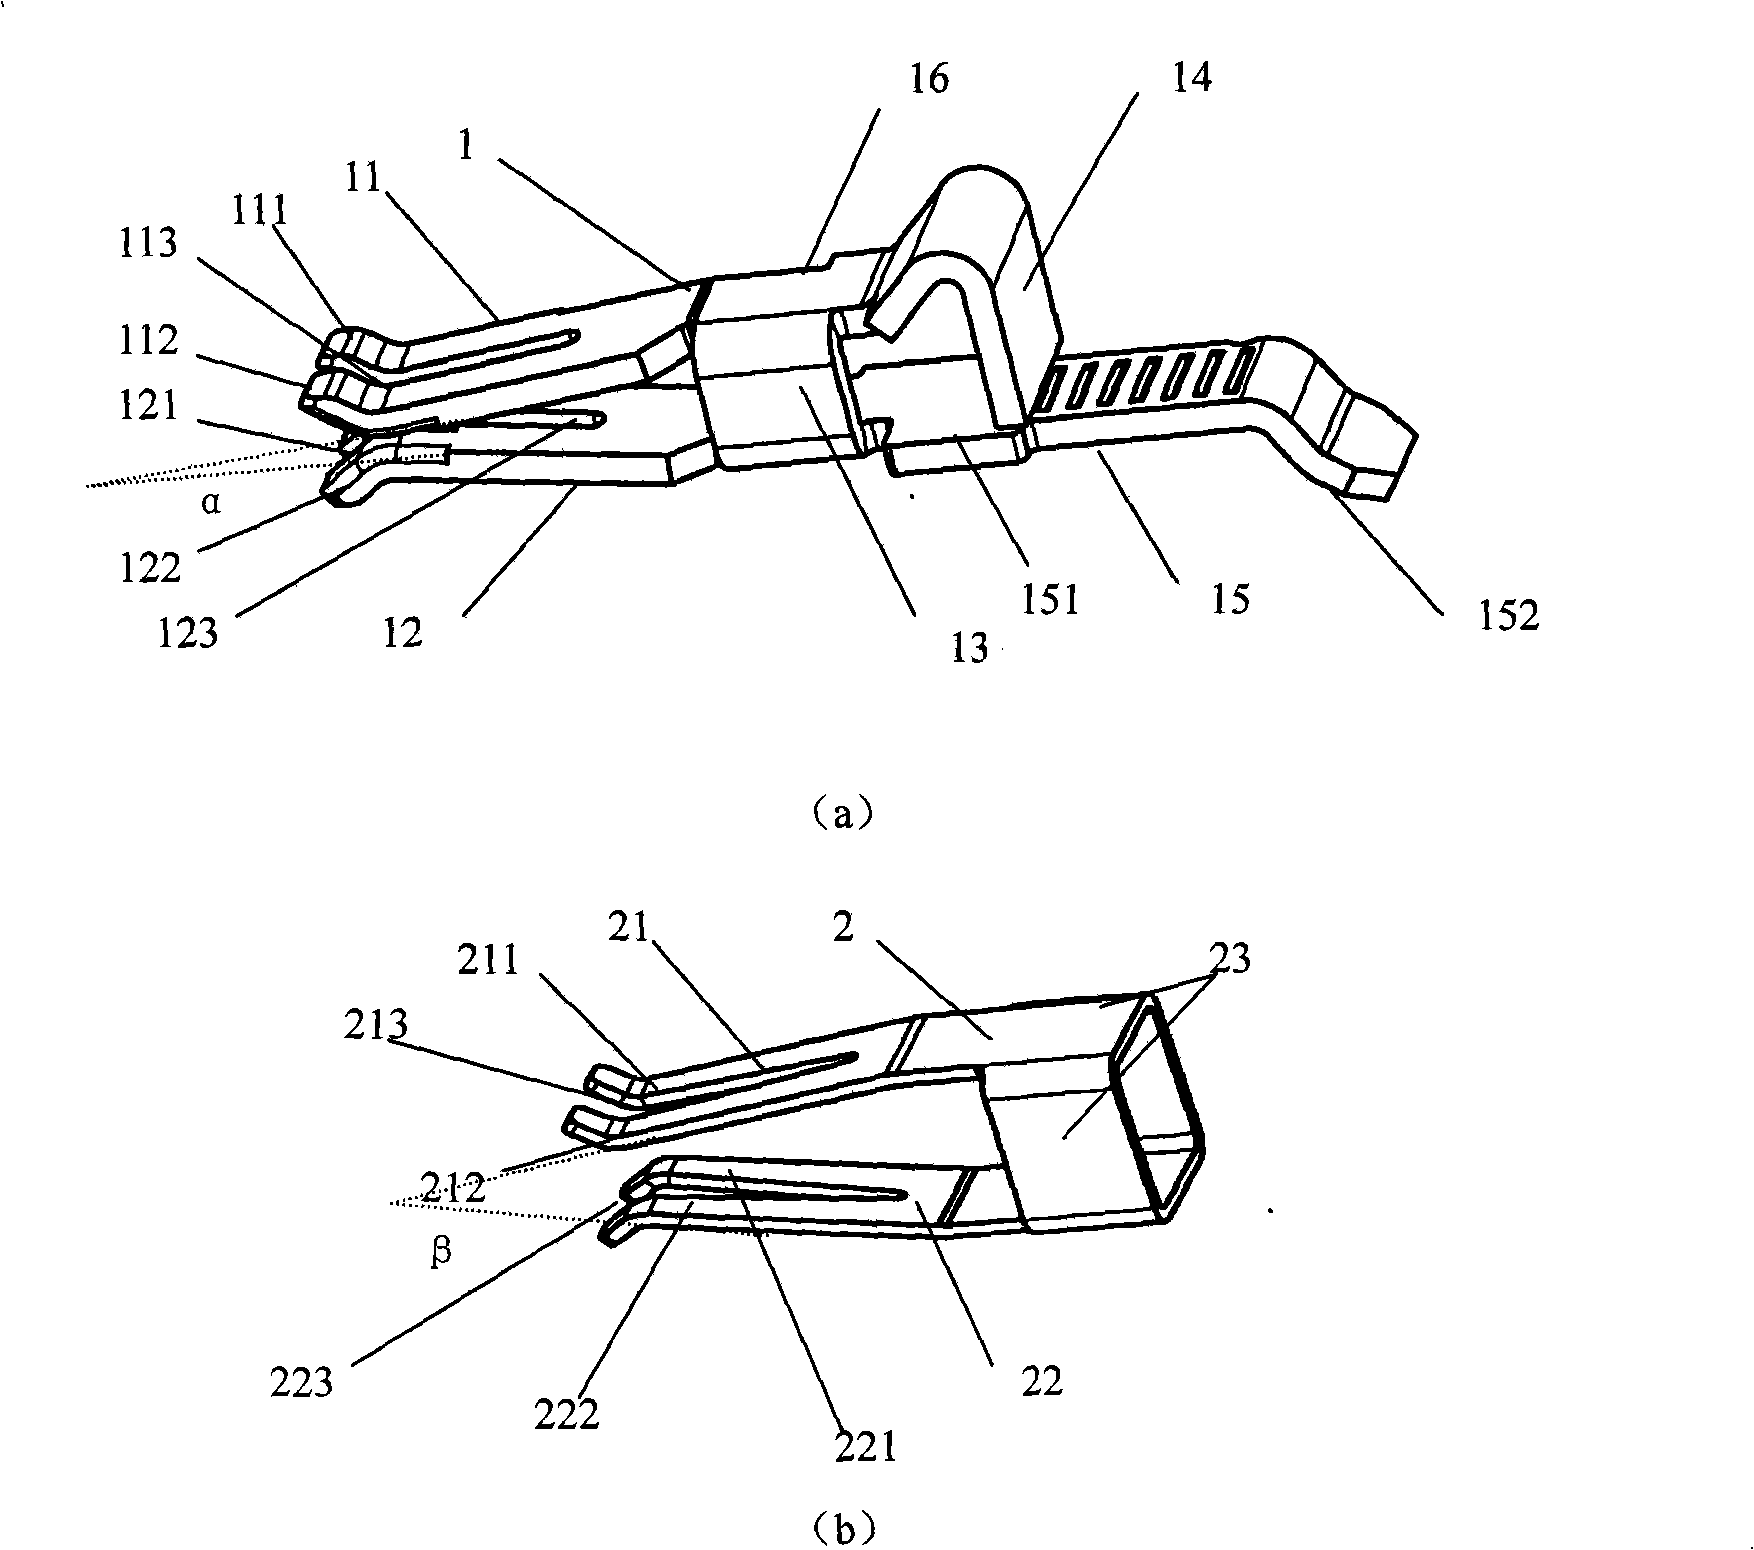 Plug-in device for electrical connection